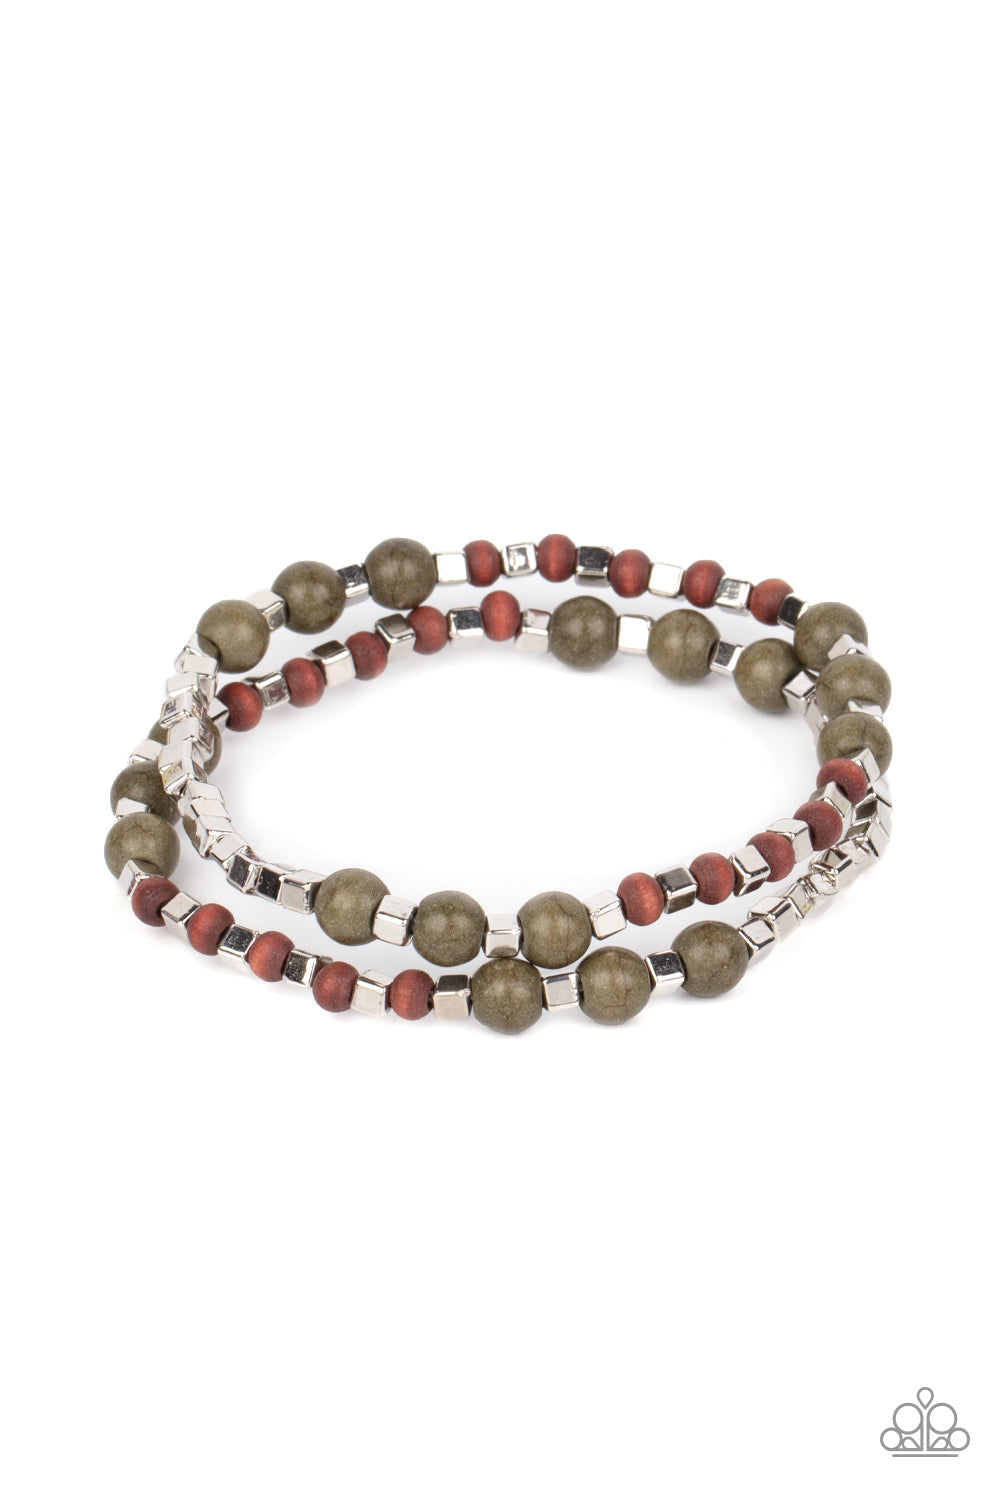 Backcountry Beauty - Green Stone - Wood Bracelets - Paparazzi Accessories -  An earthy assortment of Olive stone, wood, and silver cube beads are threaded along stretchy bands around the wrist, creating a grounding duo. Sold as one pair of bracelets.